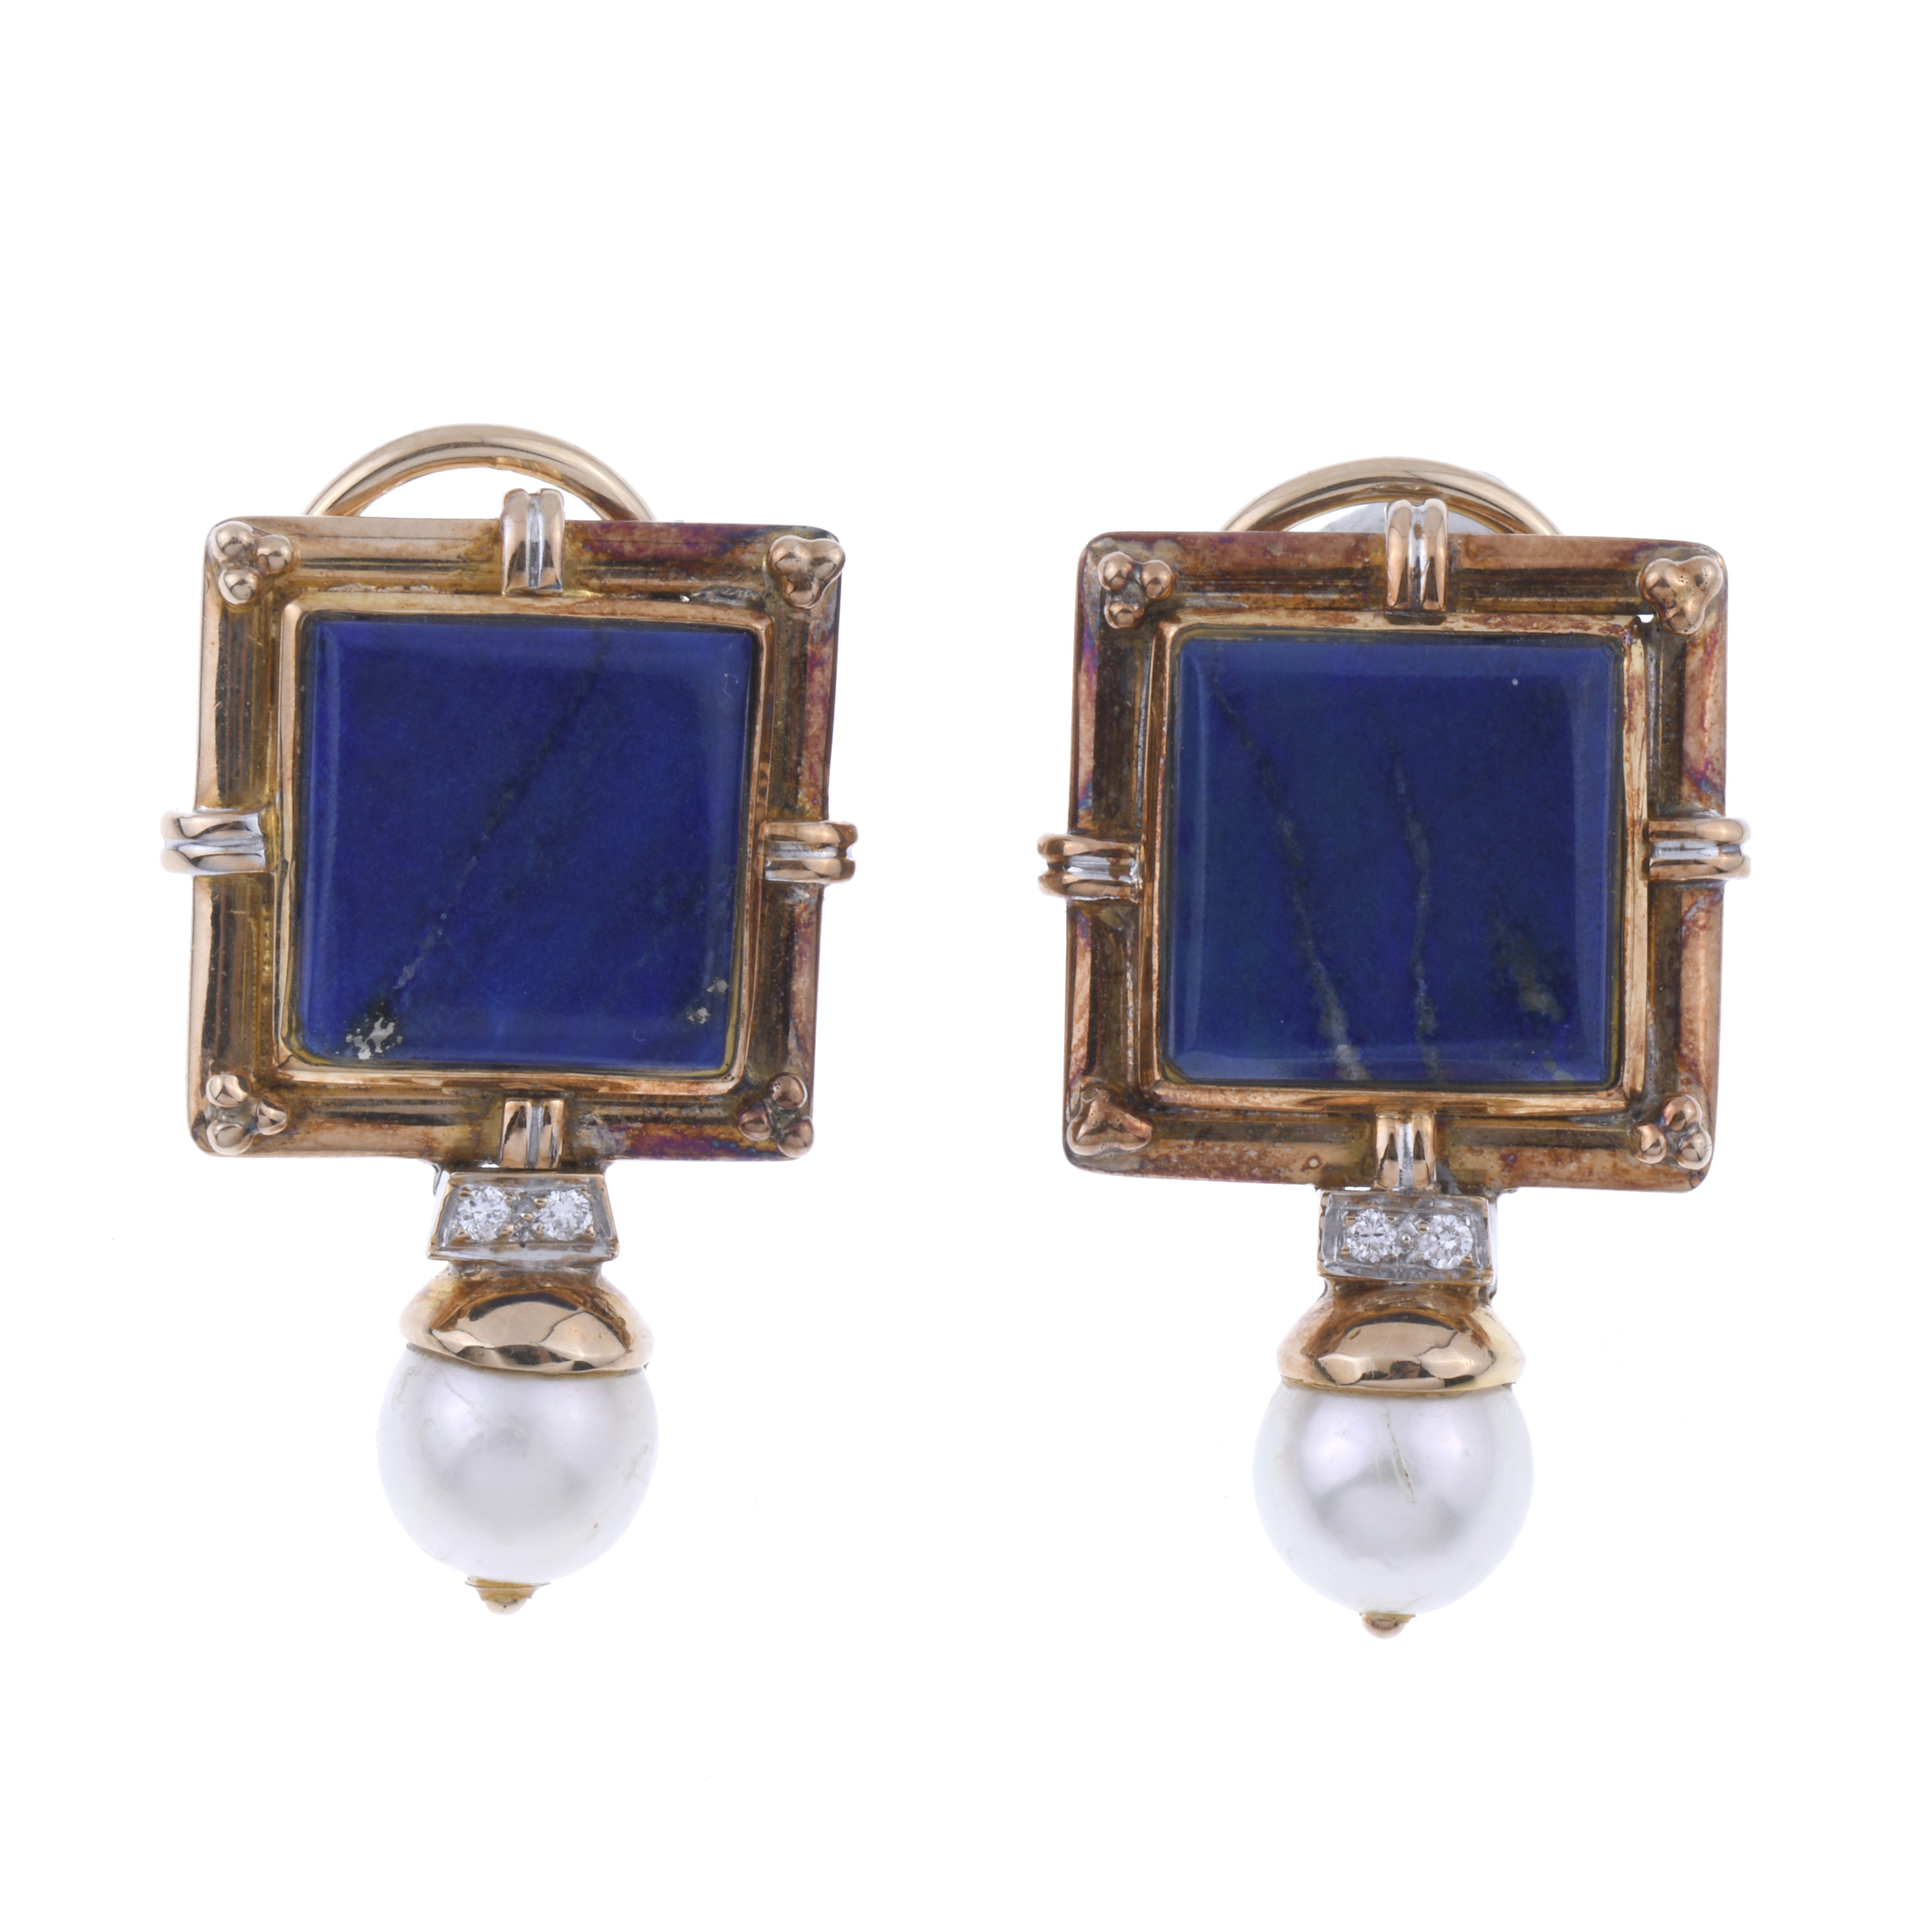 EARRINGS WITH LAPIS LAZULI AND PEARL.